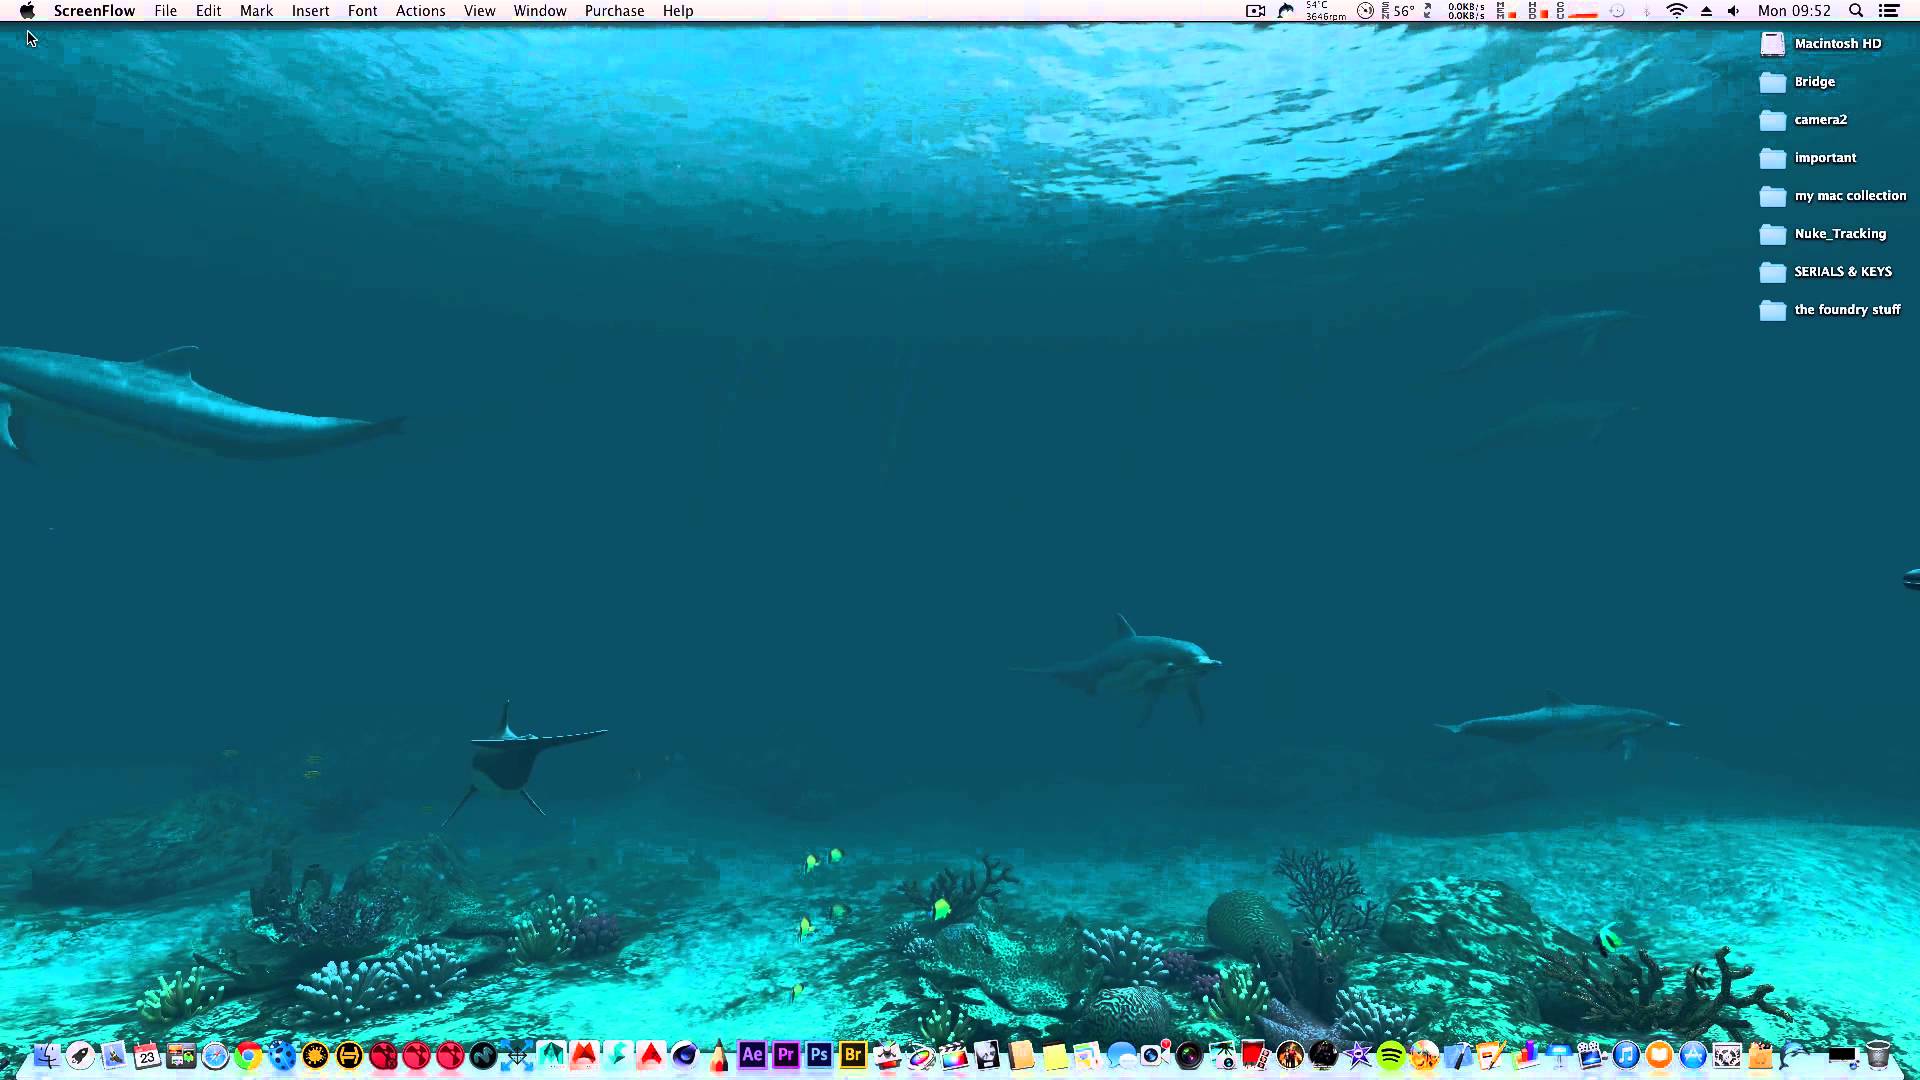 Dolphin Animated Wallpaper for Mac 4k Displays - YouTube